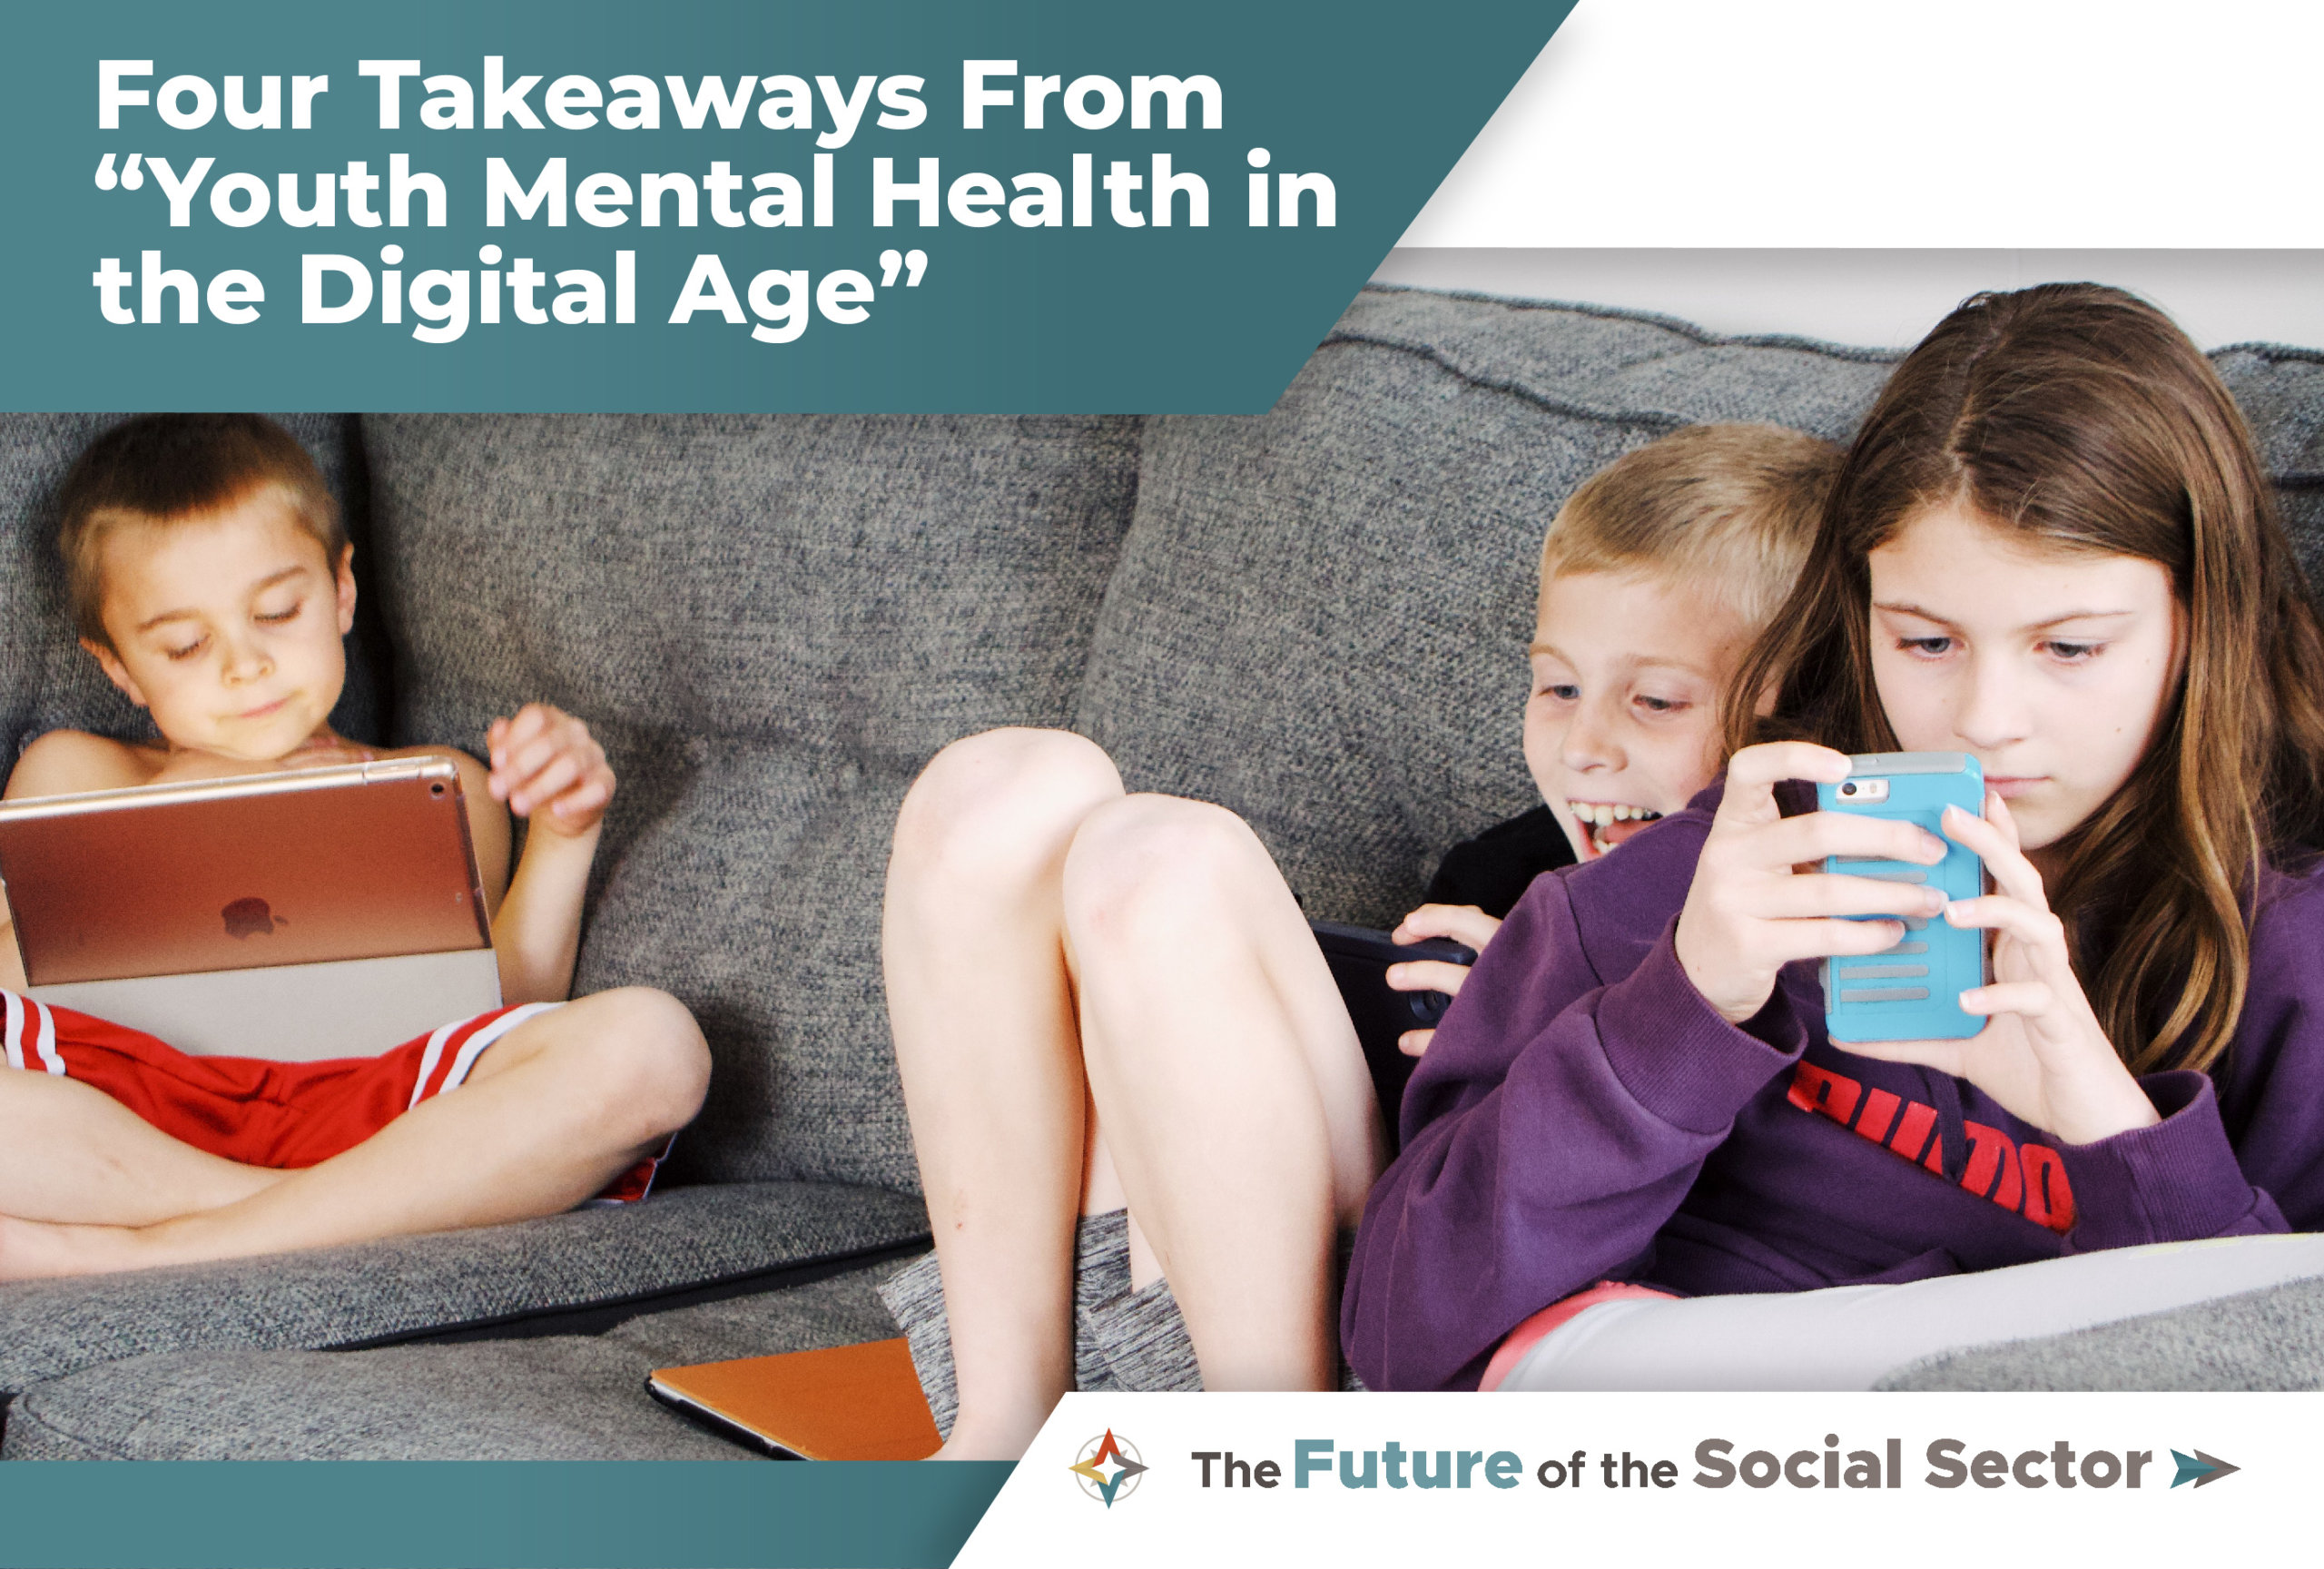 Four Takeaways from “Youth Mental Health in the Digital Age”